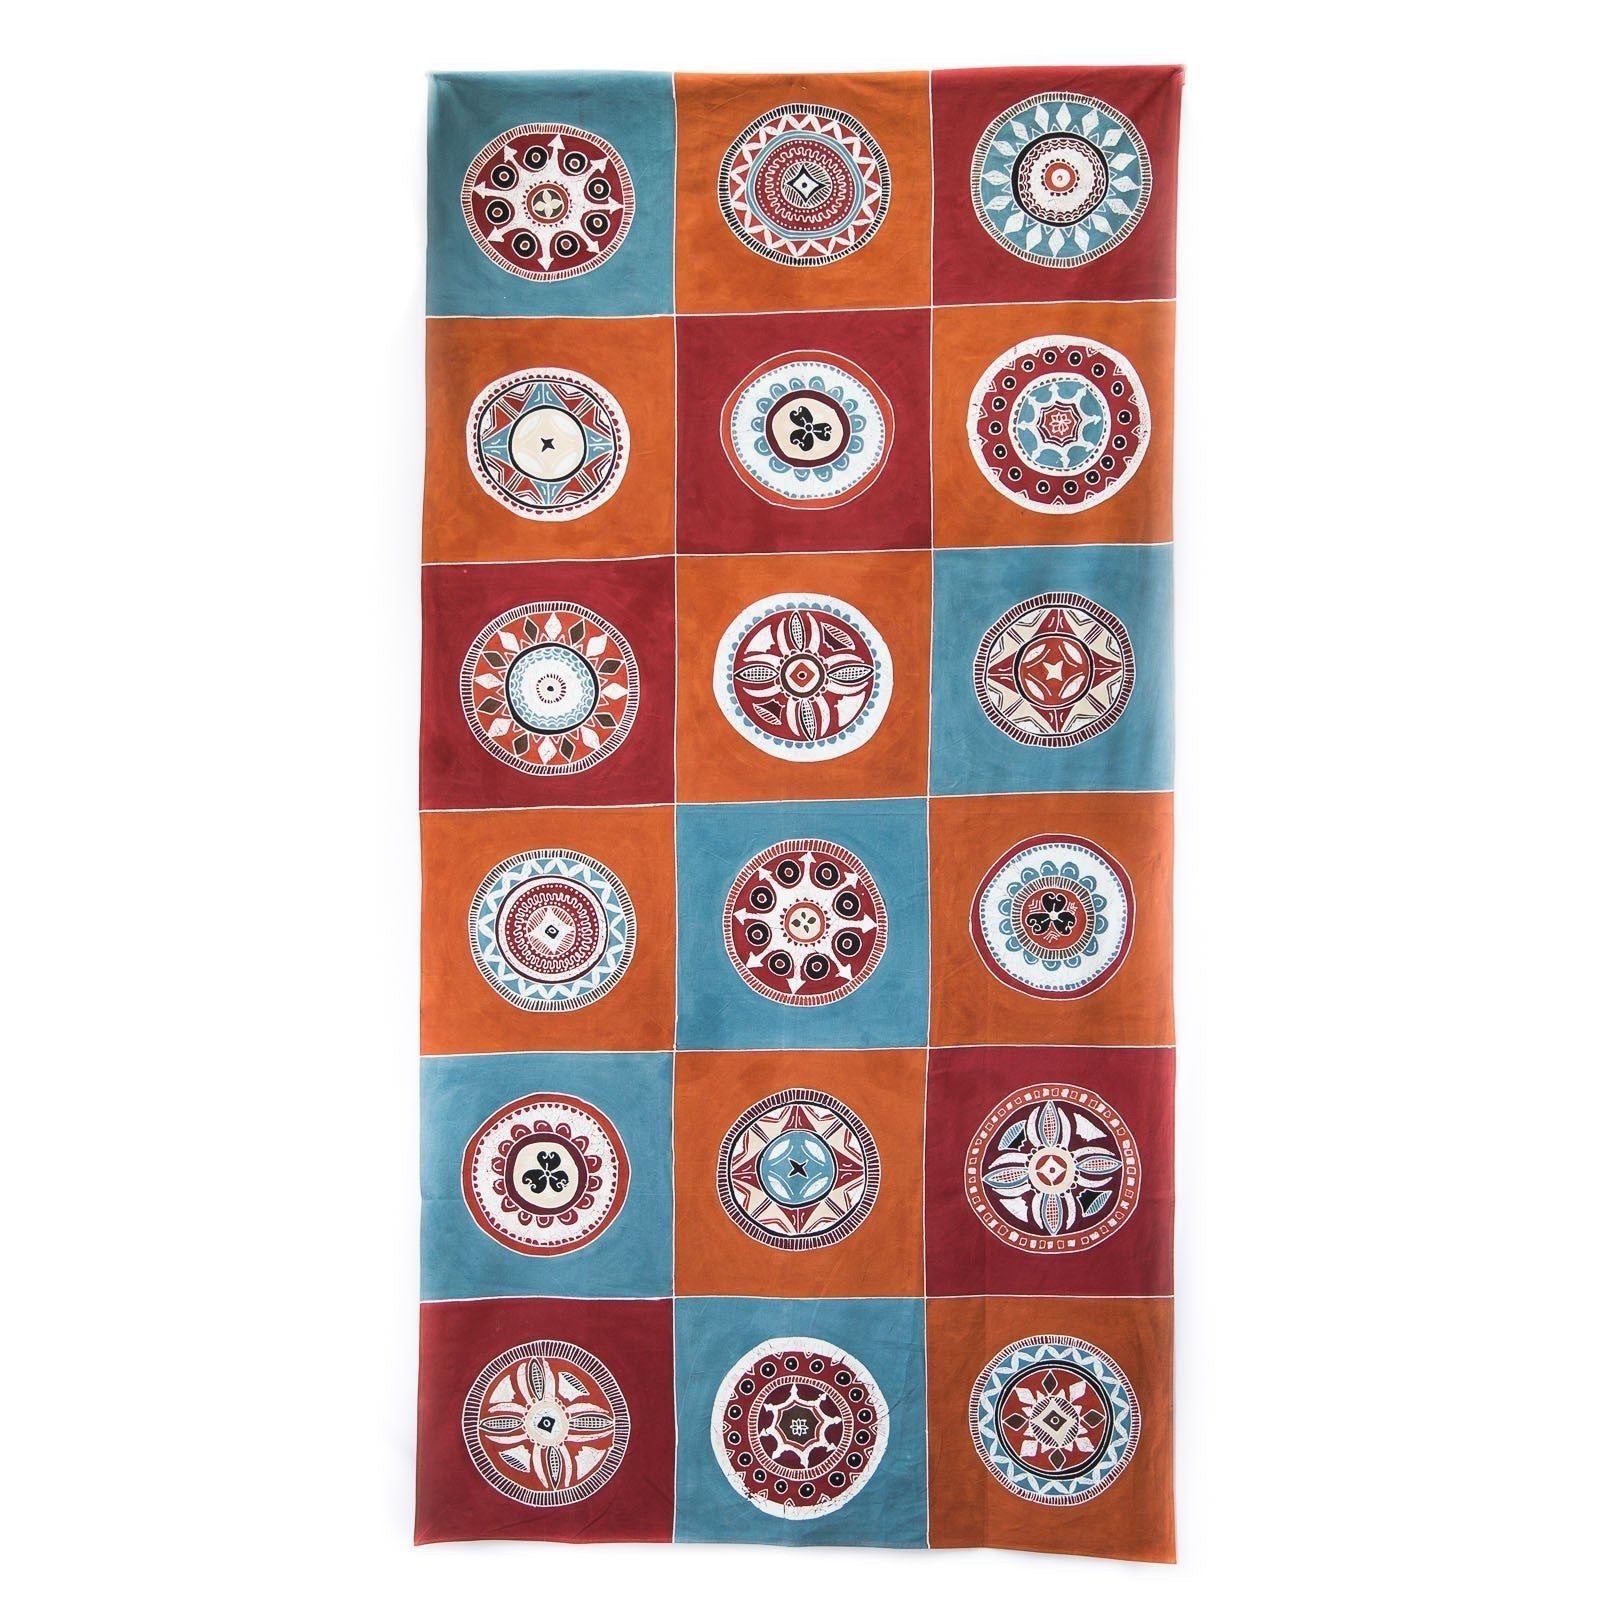 IMPERFECT SALE : African Circles Massai Tablecloth Medium - Hand Painted by TRIBAL TEXTILES - Handcrafted Home Decor Interiors - African Made